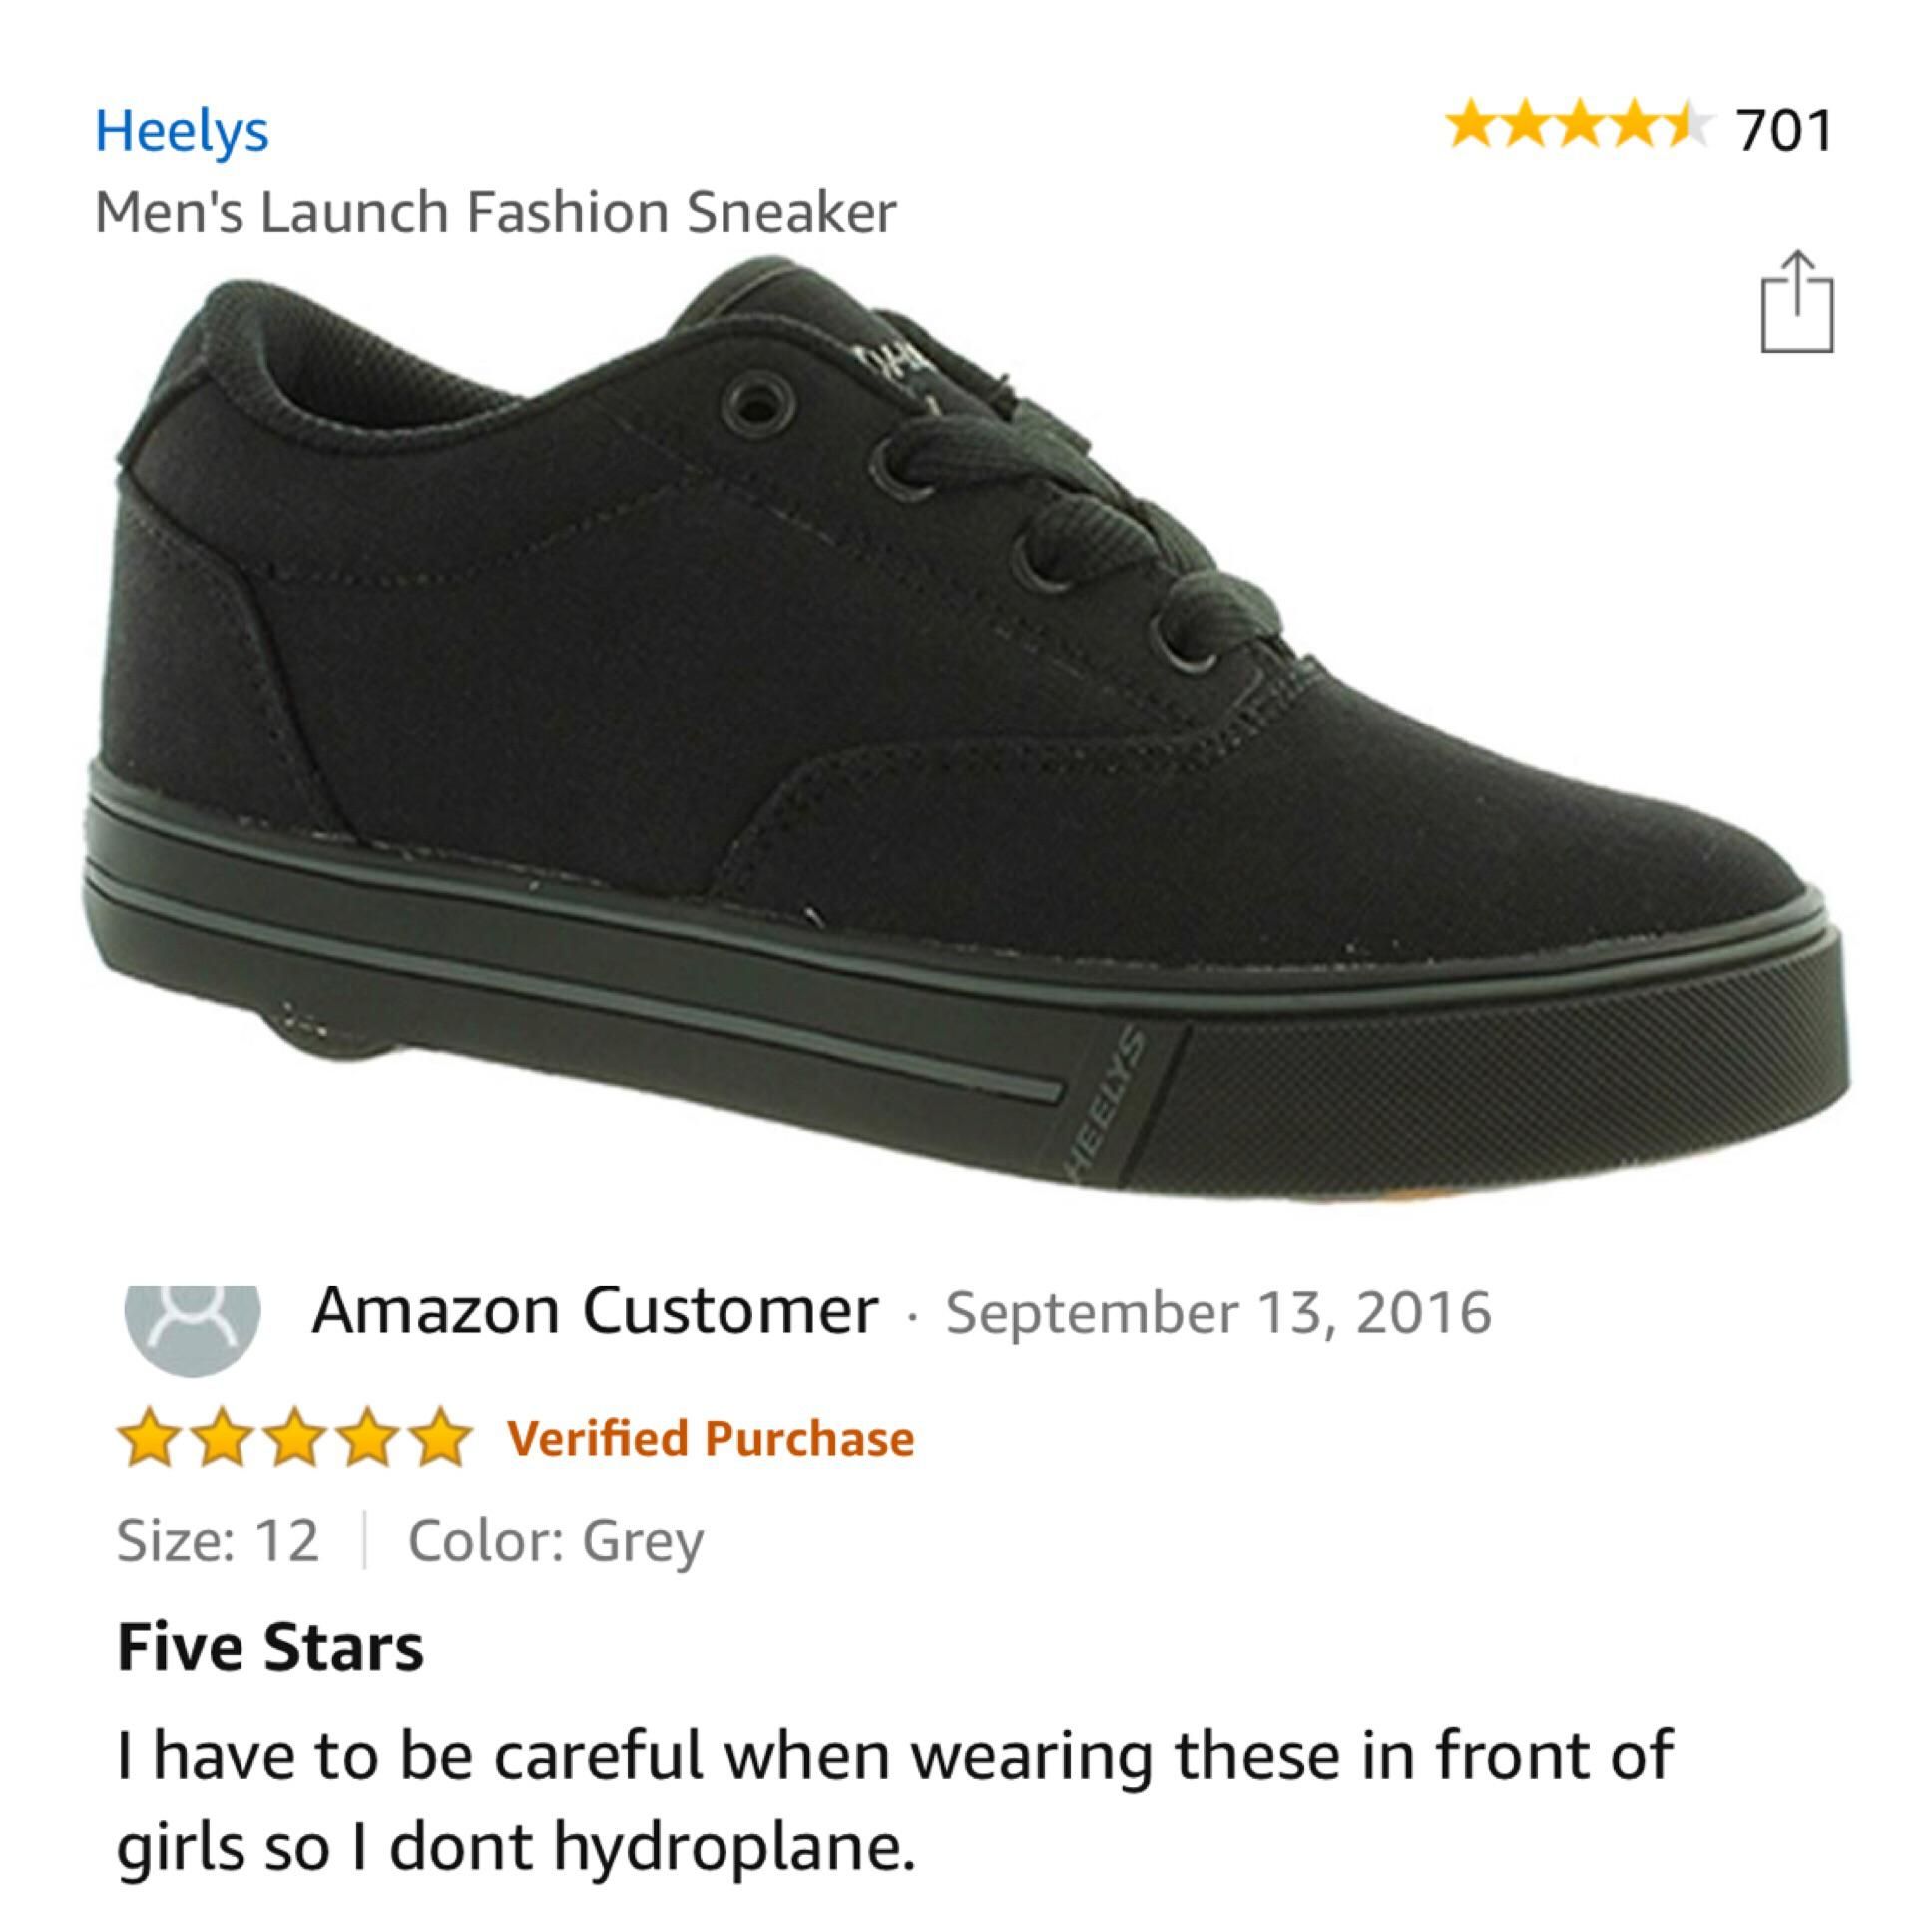 This review sold me on getting some friggin Heelys!